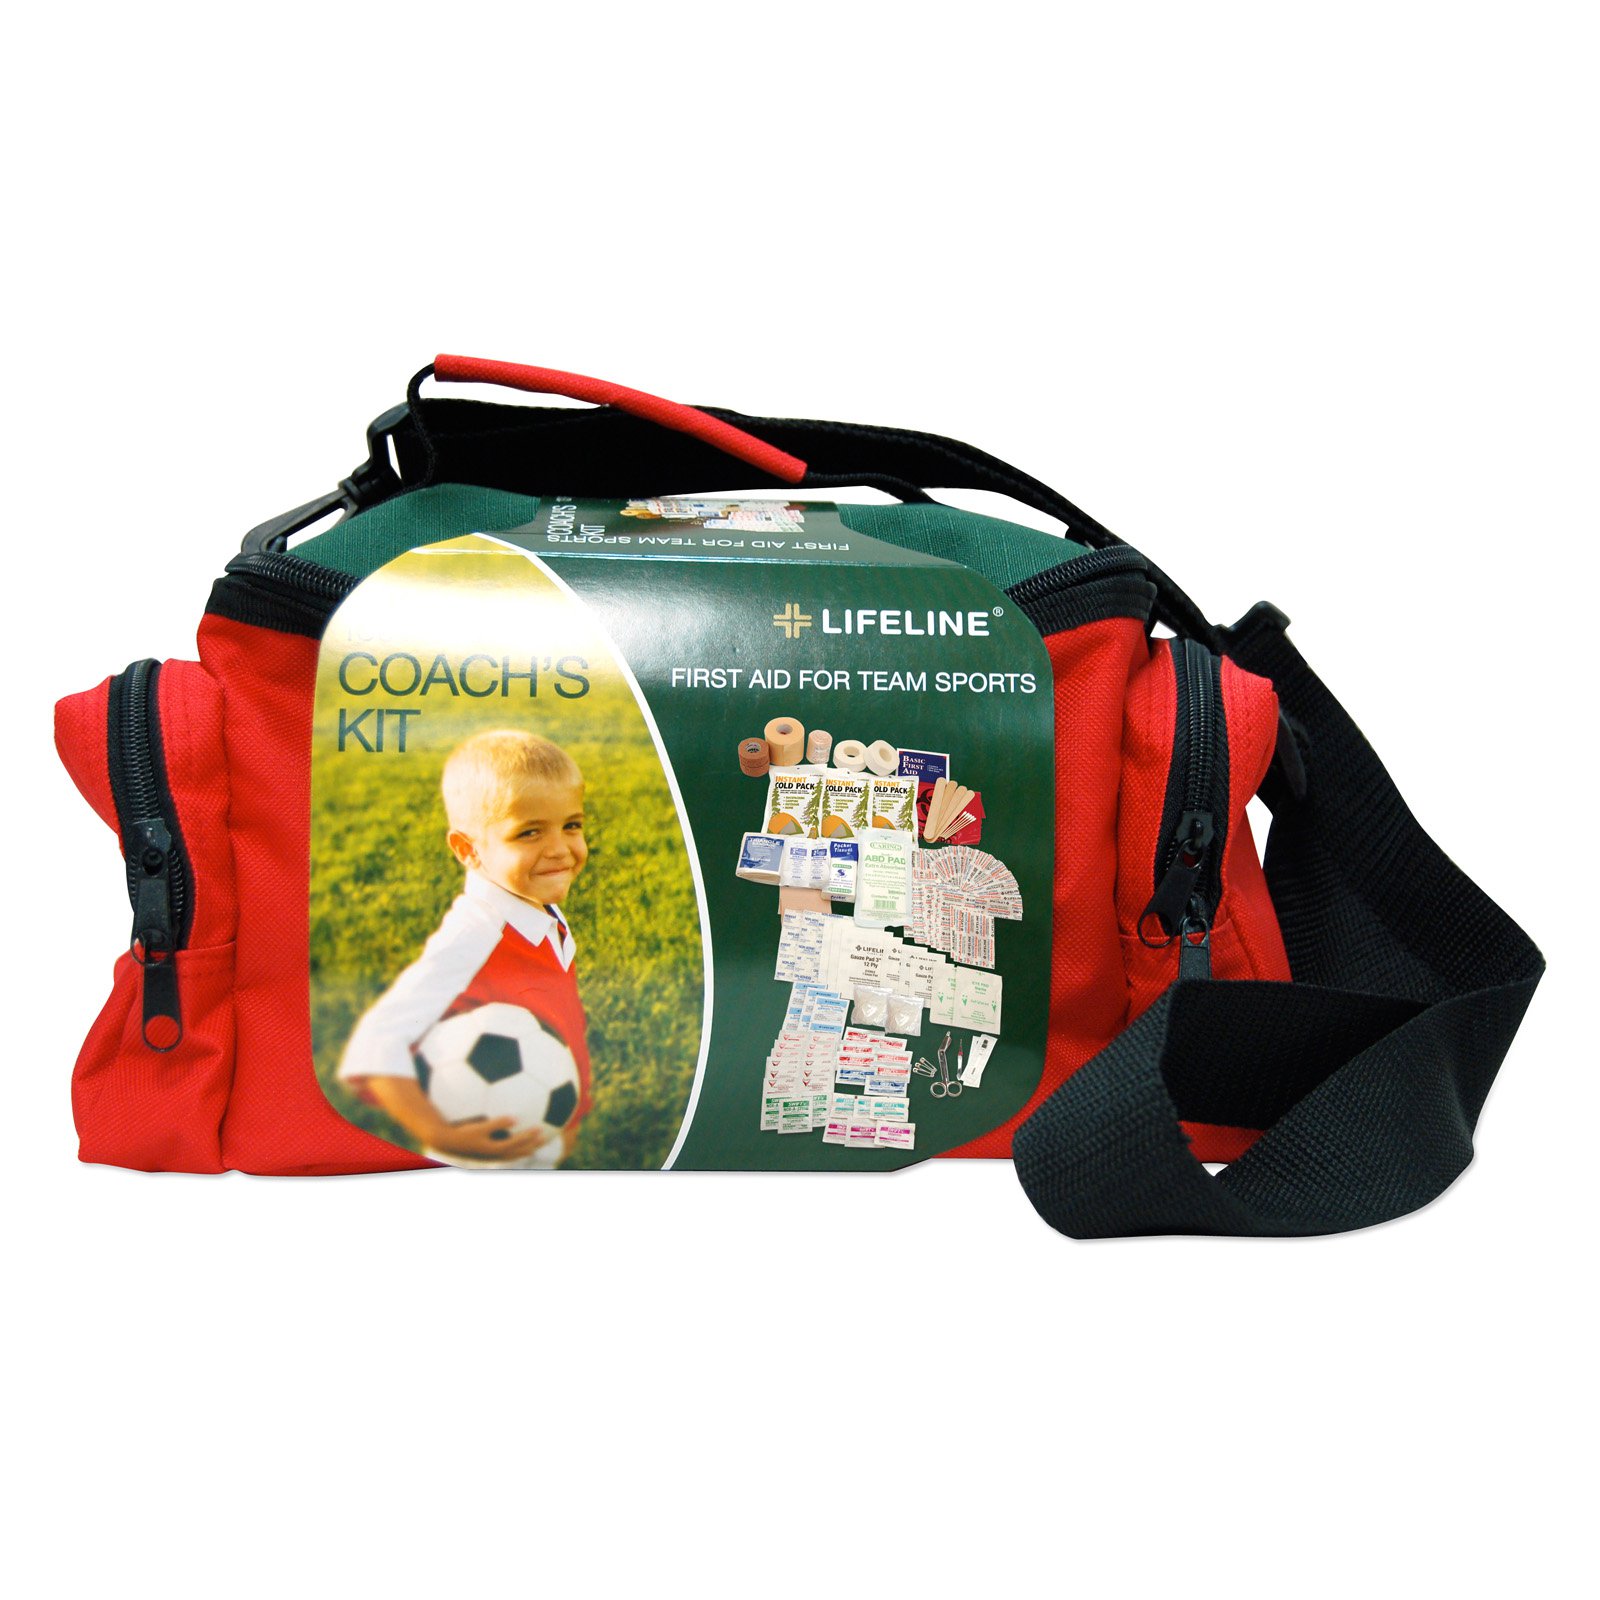 Team Sports - Coach's First Aid Kit - image 1 of 2